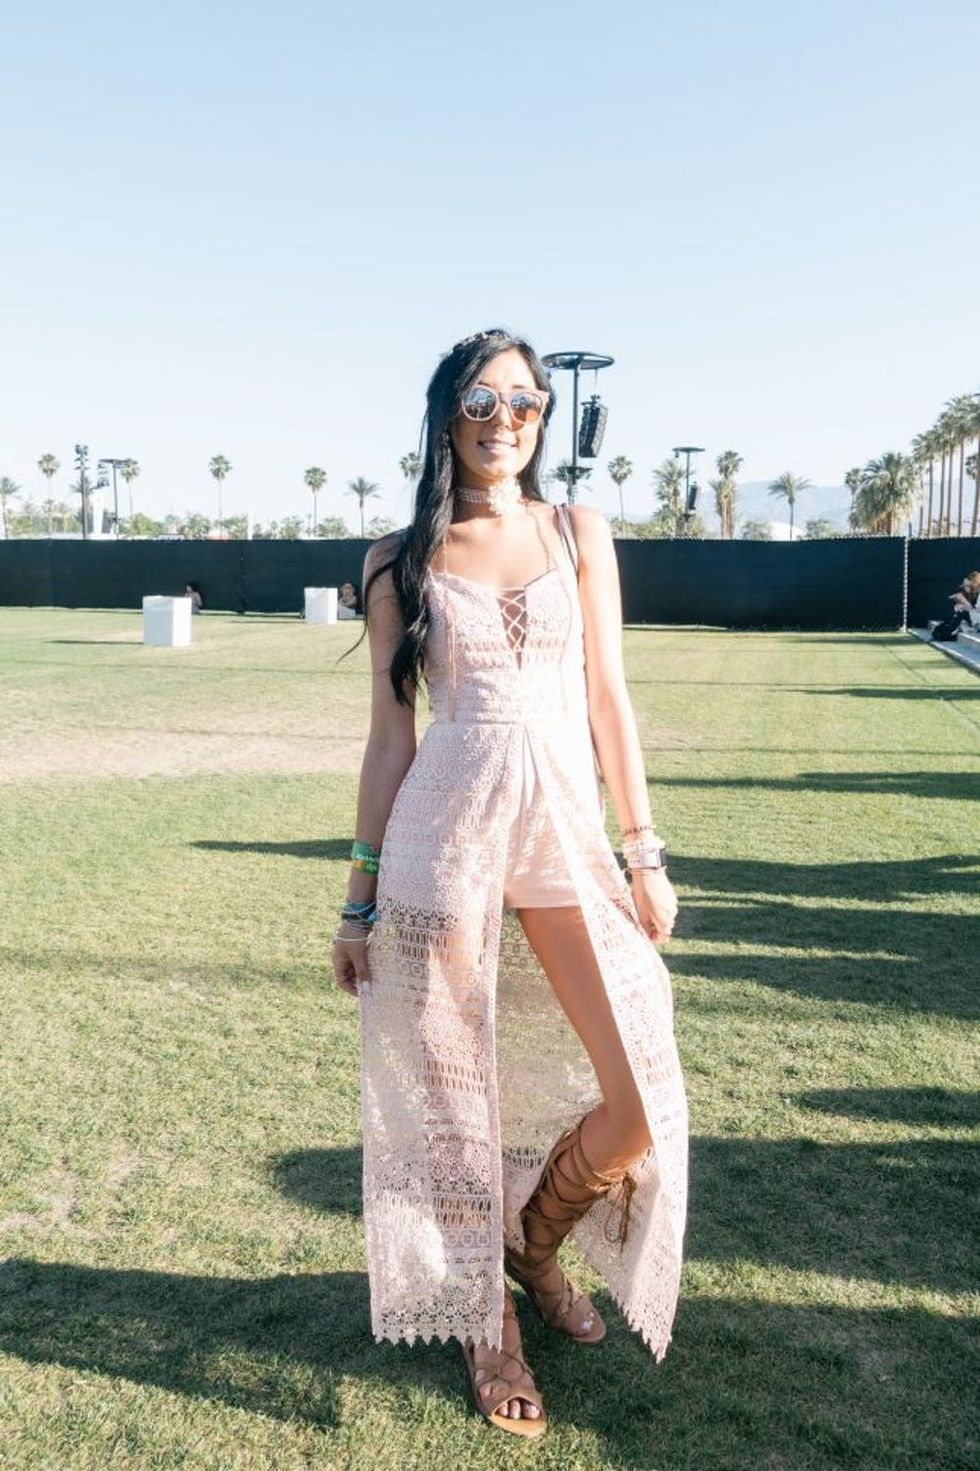 23 of the Best Street Style Looks We Saw at Coachella 2017 - Brit + Co